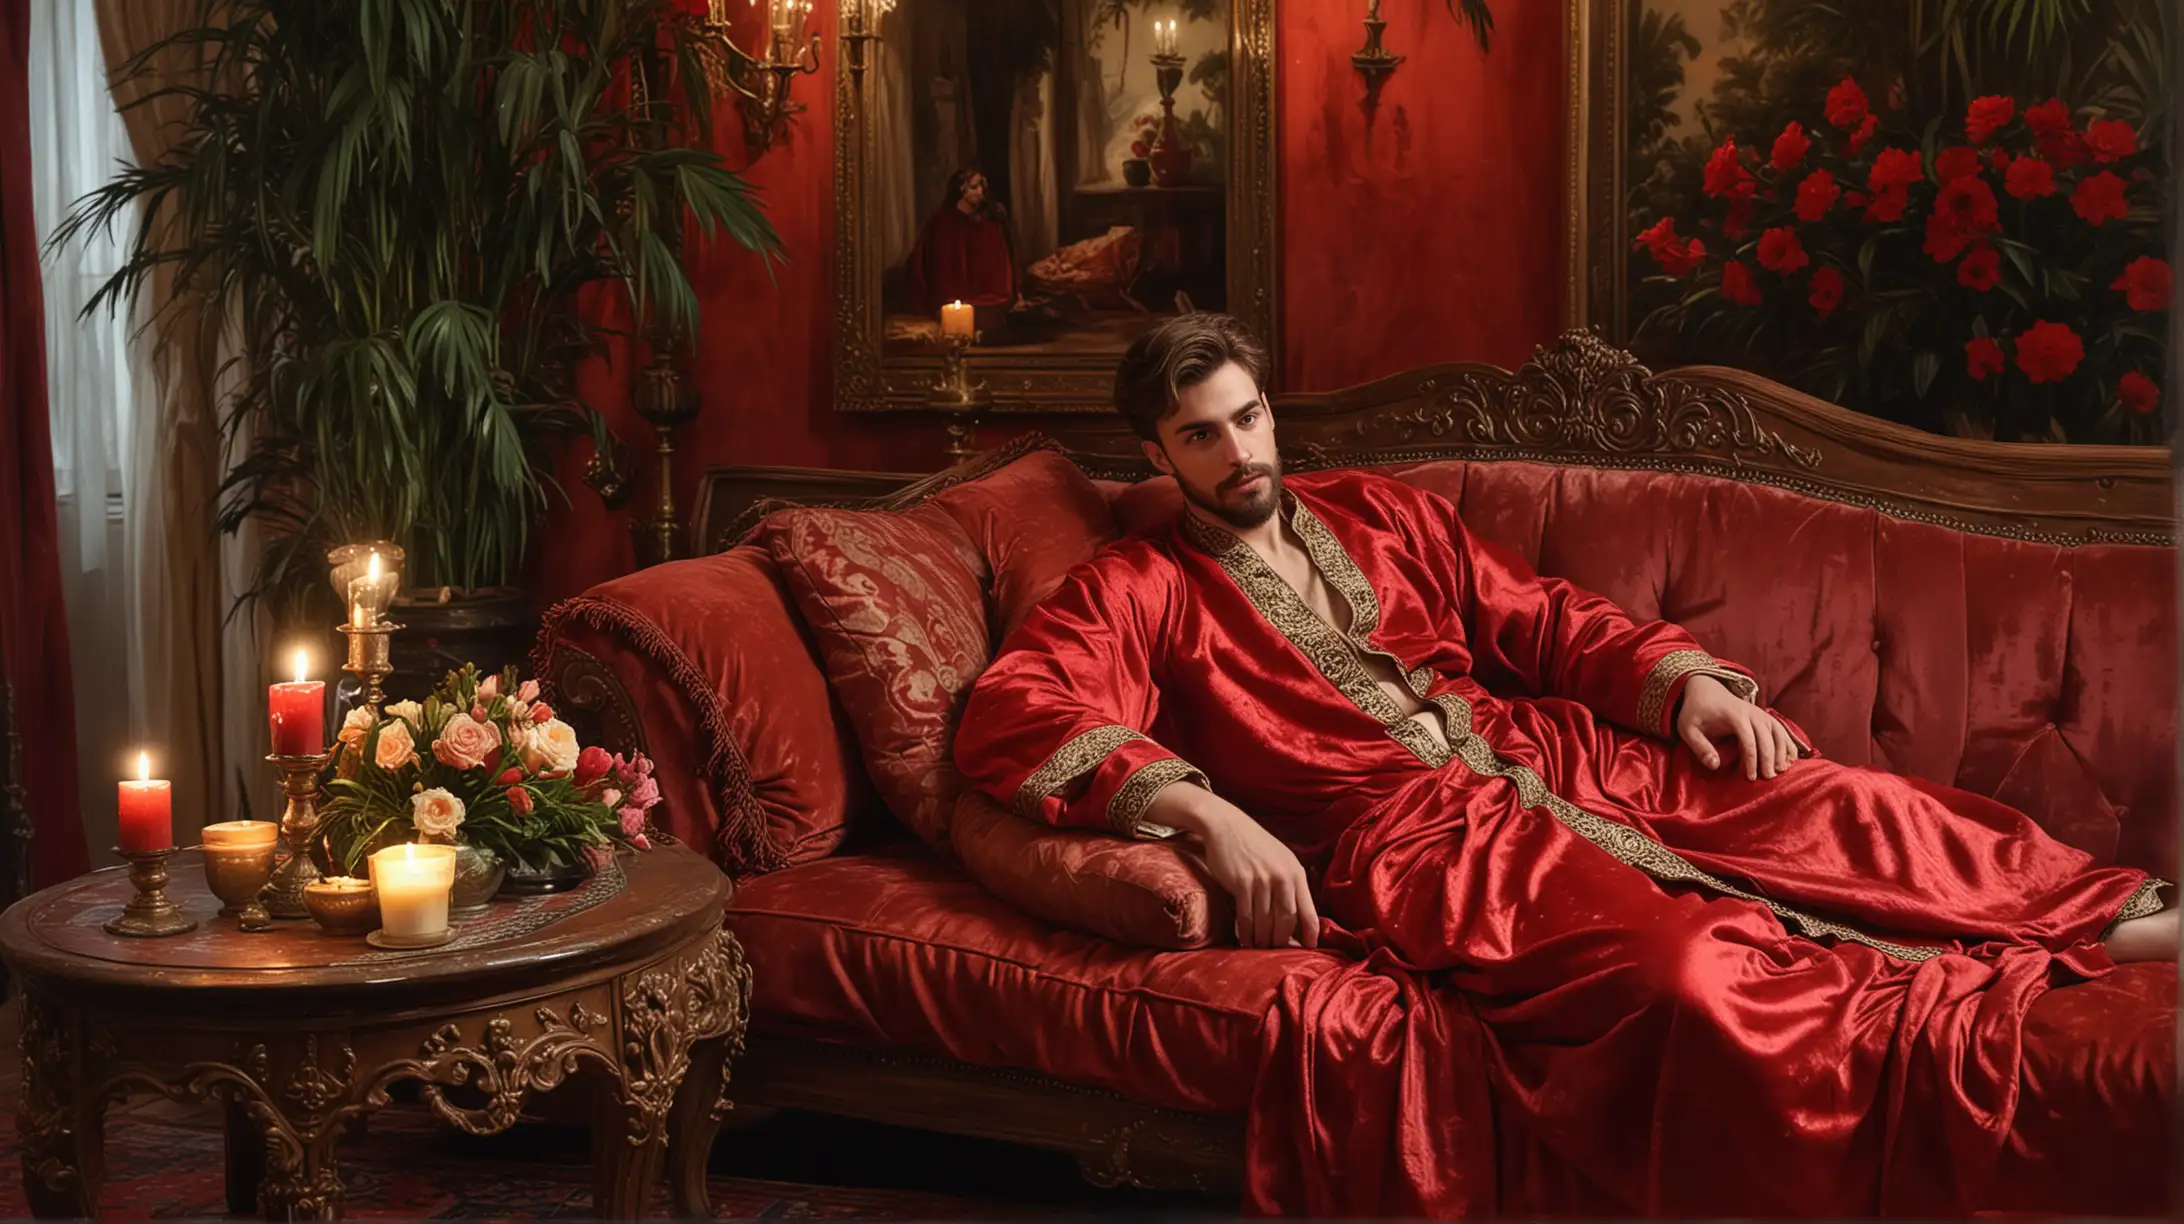 Melancholic Young Man in Red Robe on Velvet Rose Sofa in Luxurious Interior